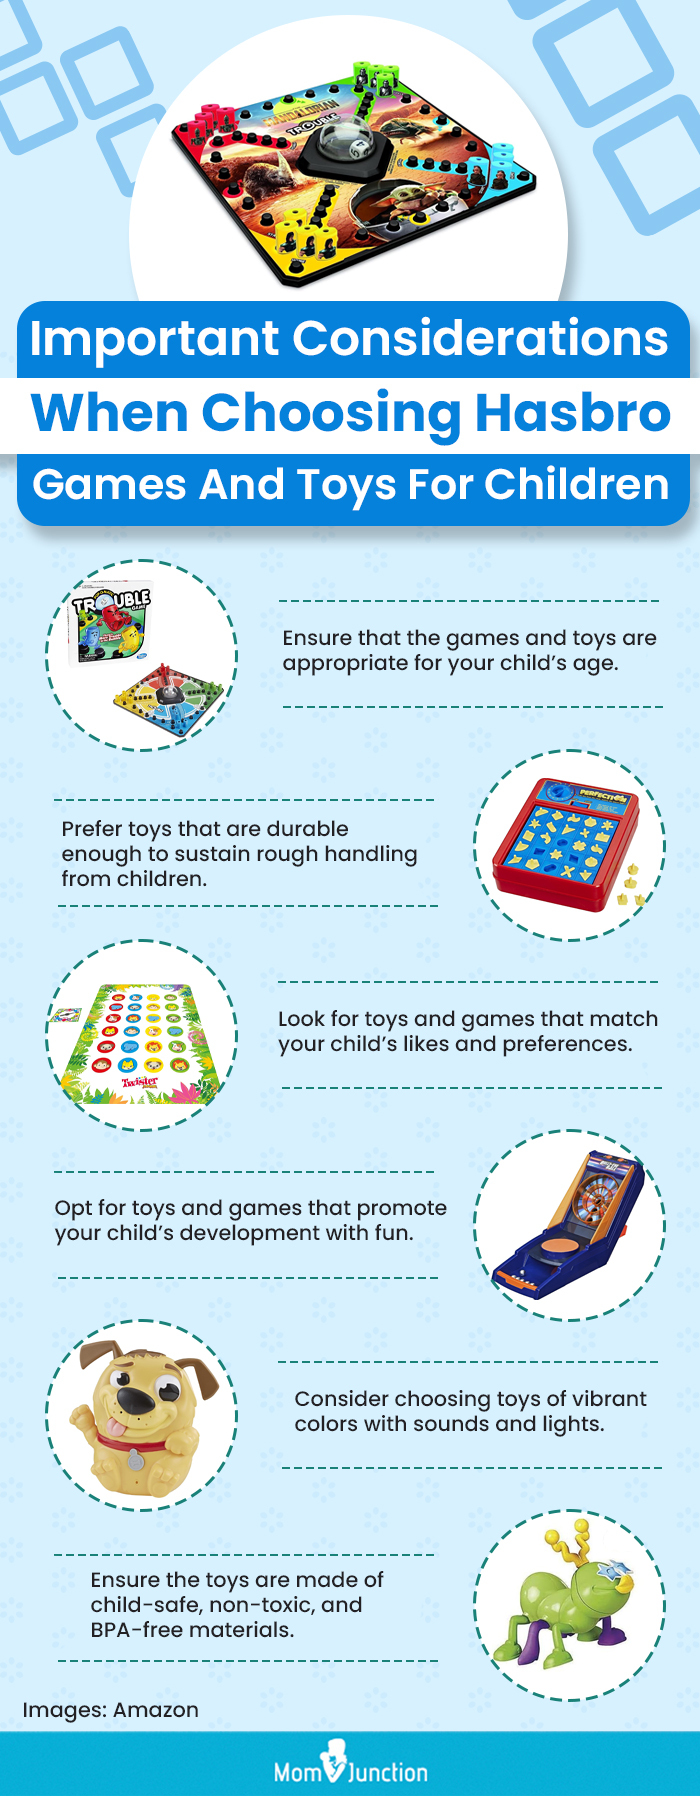 Important Considerations When Choosing Hasbro Games And Toys For Children (infographic)